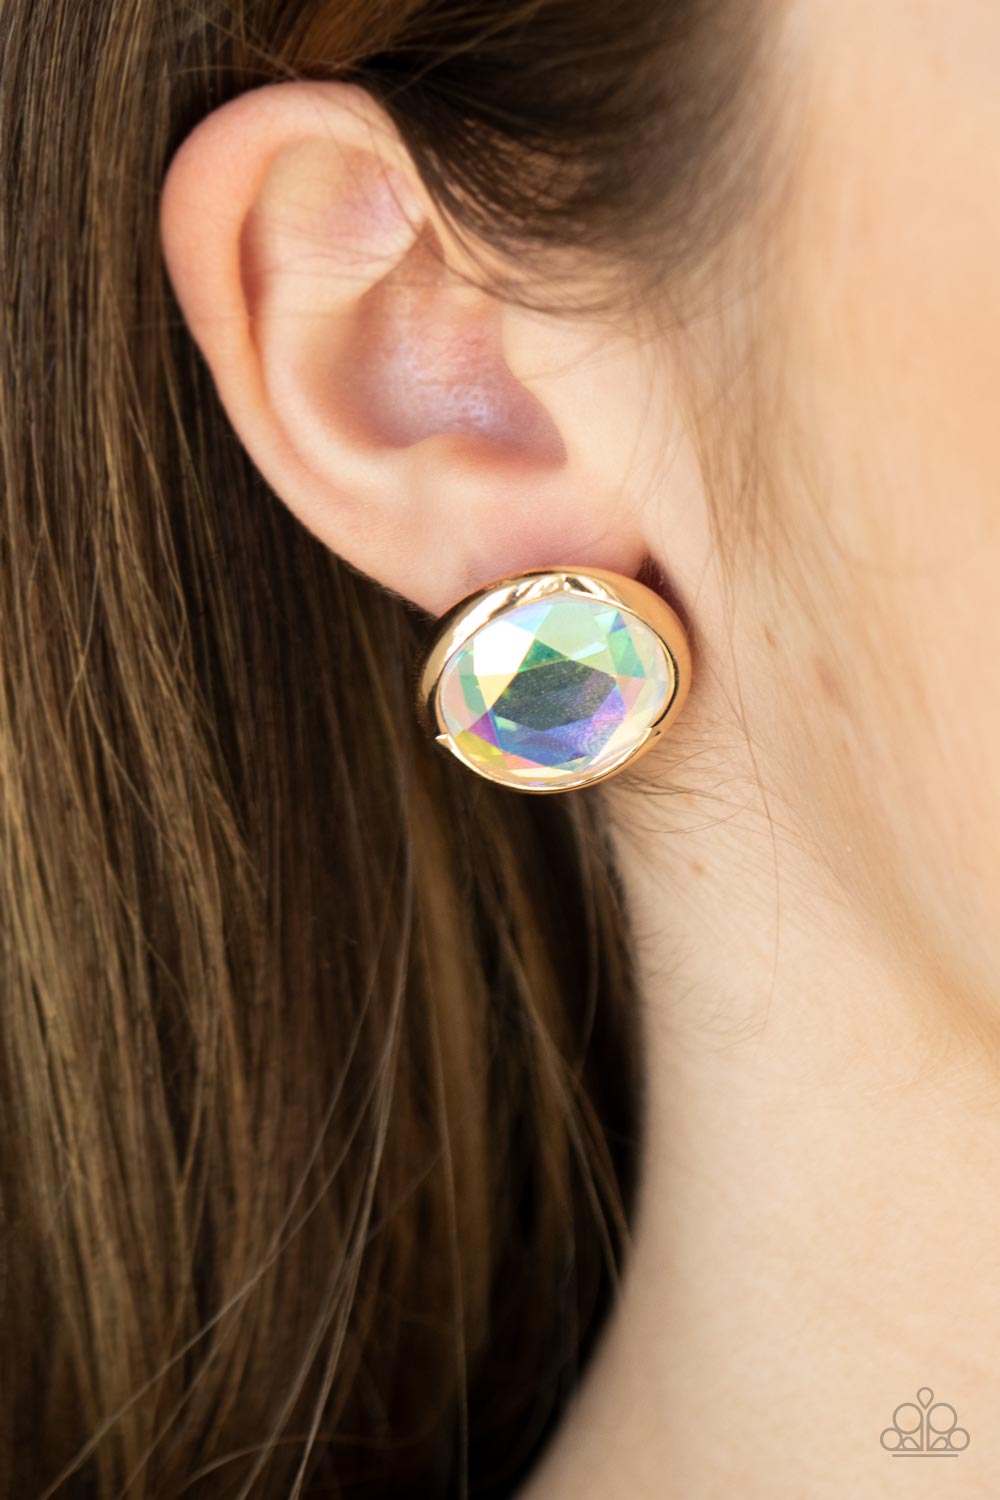 Double-Take Twinkle - Gold Iridescent Gem Post Earrings featuring a flashy faceted finish, an oversized iridescent gem is pressed into a sleek gold fitting for a dramatic pop of dazzle. Earring attaches to a standard post fitting.  Sold as one pair of post earrings.